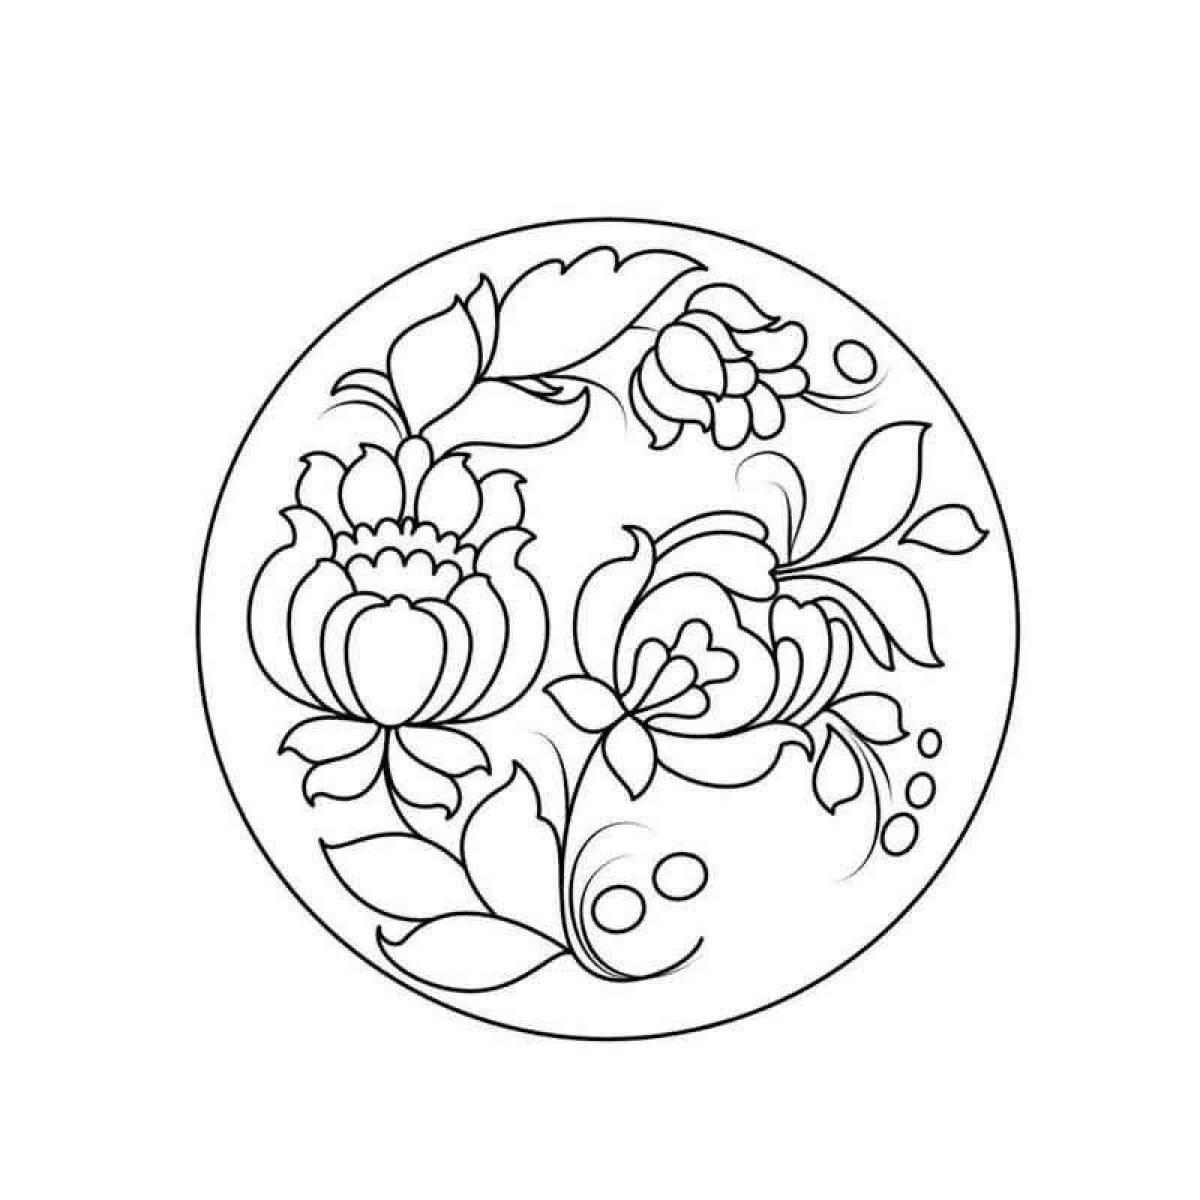 Coloring for a complex Gzhel plate